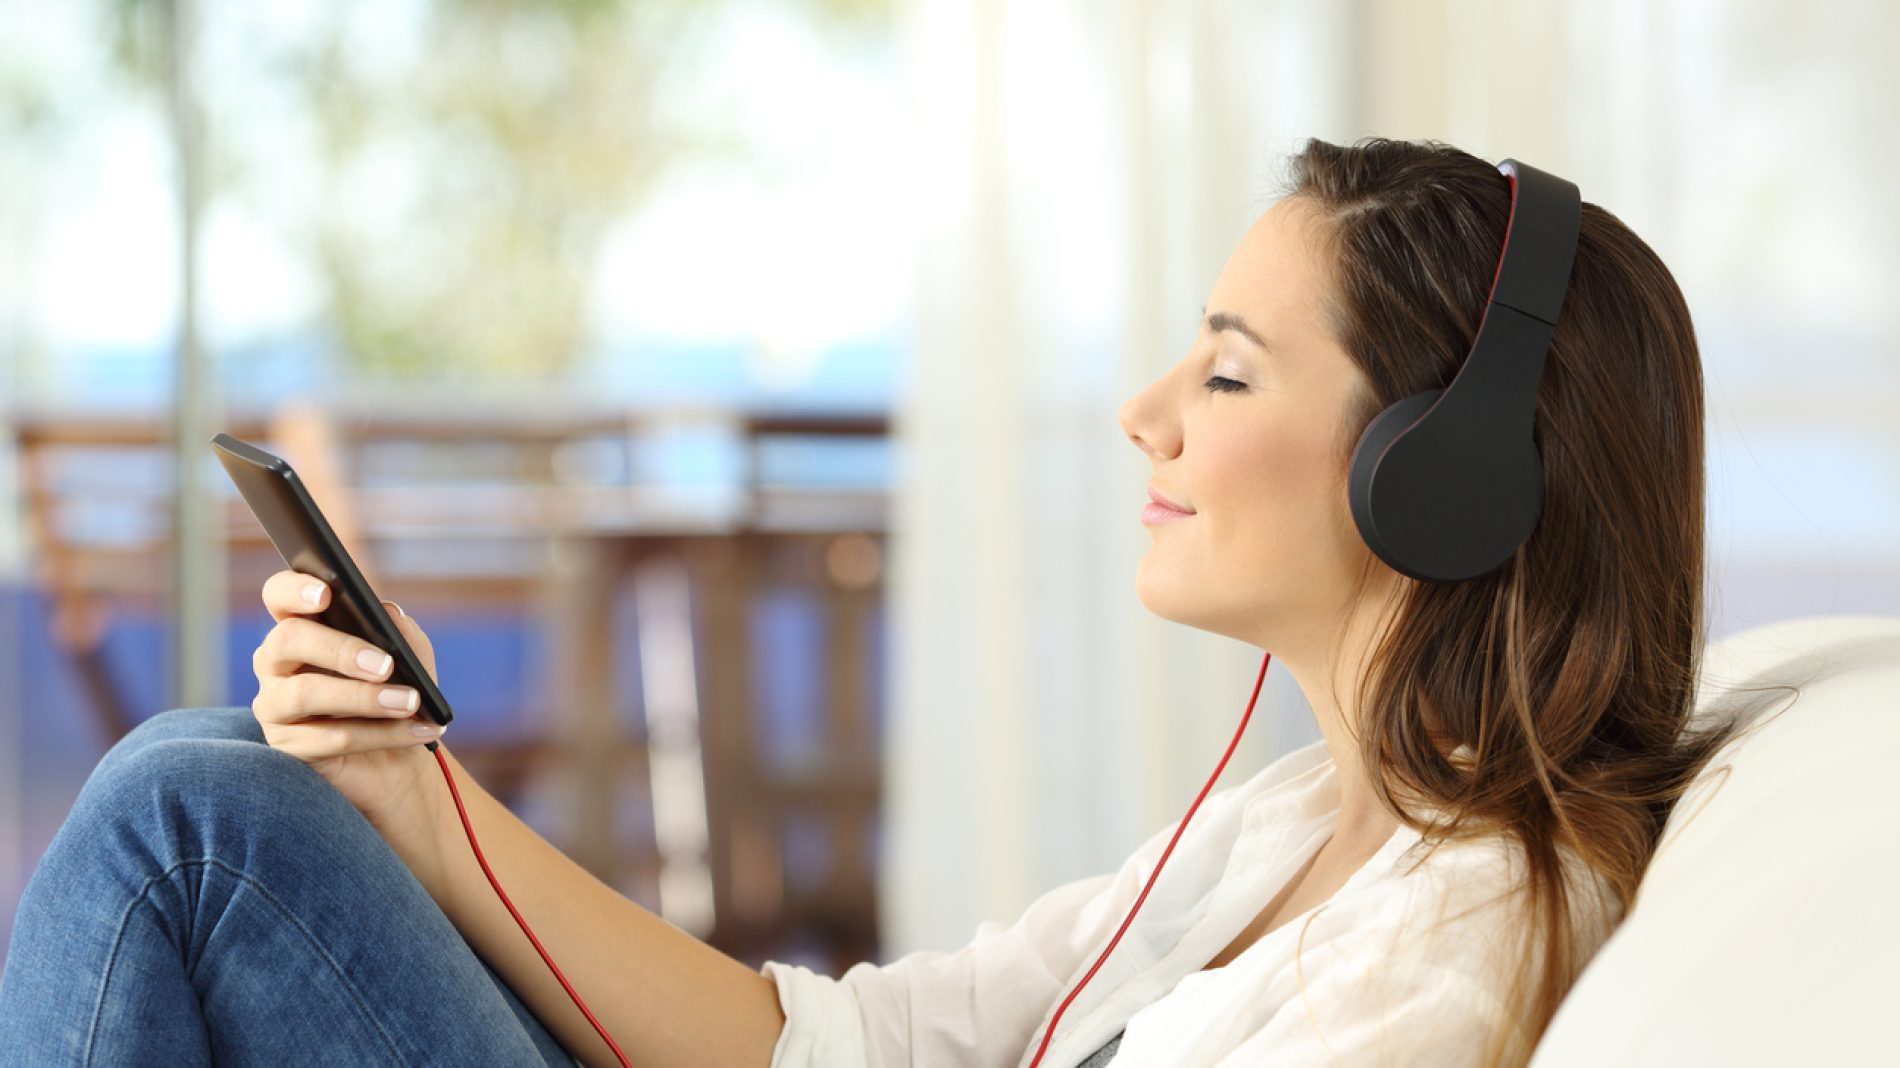 Profile of a woman relaxing listening music